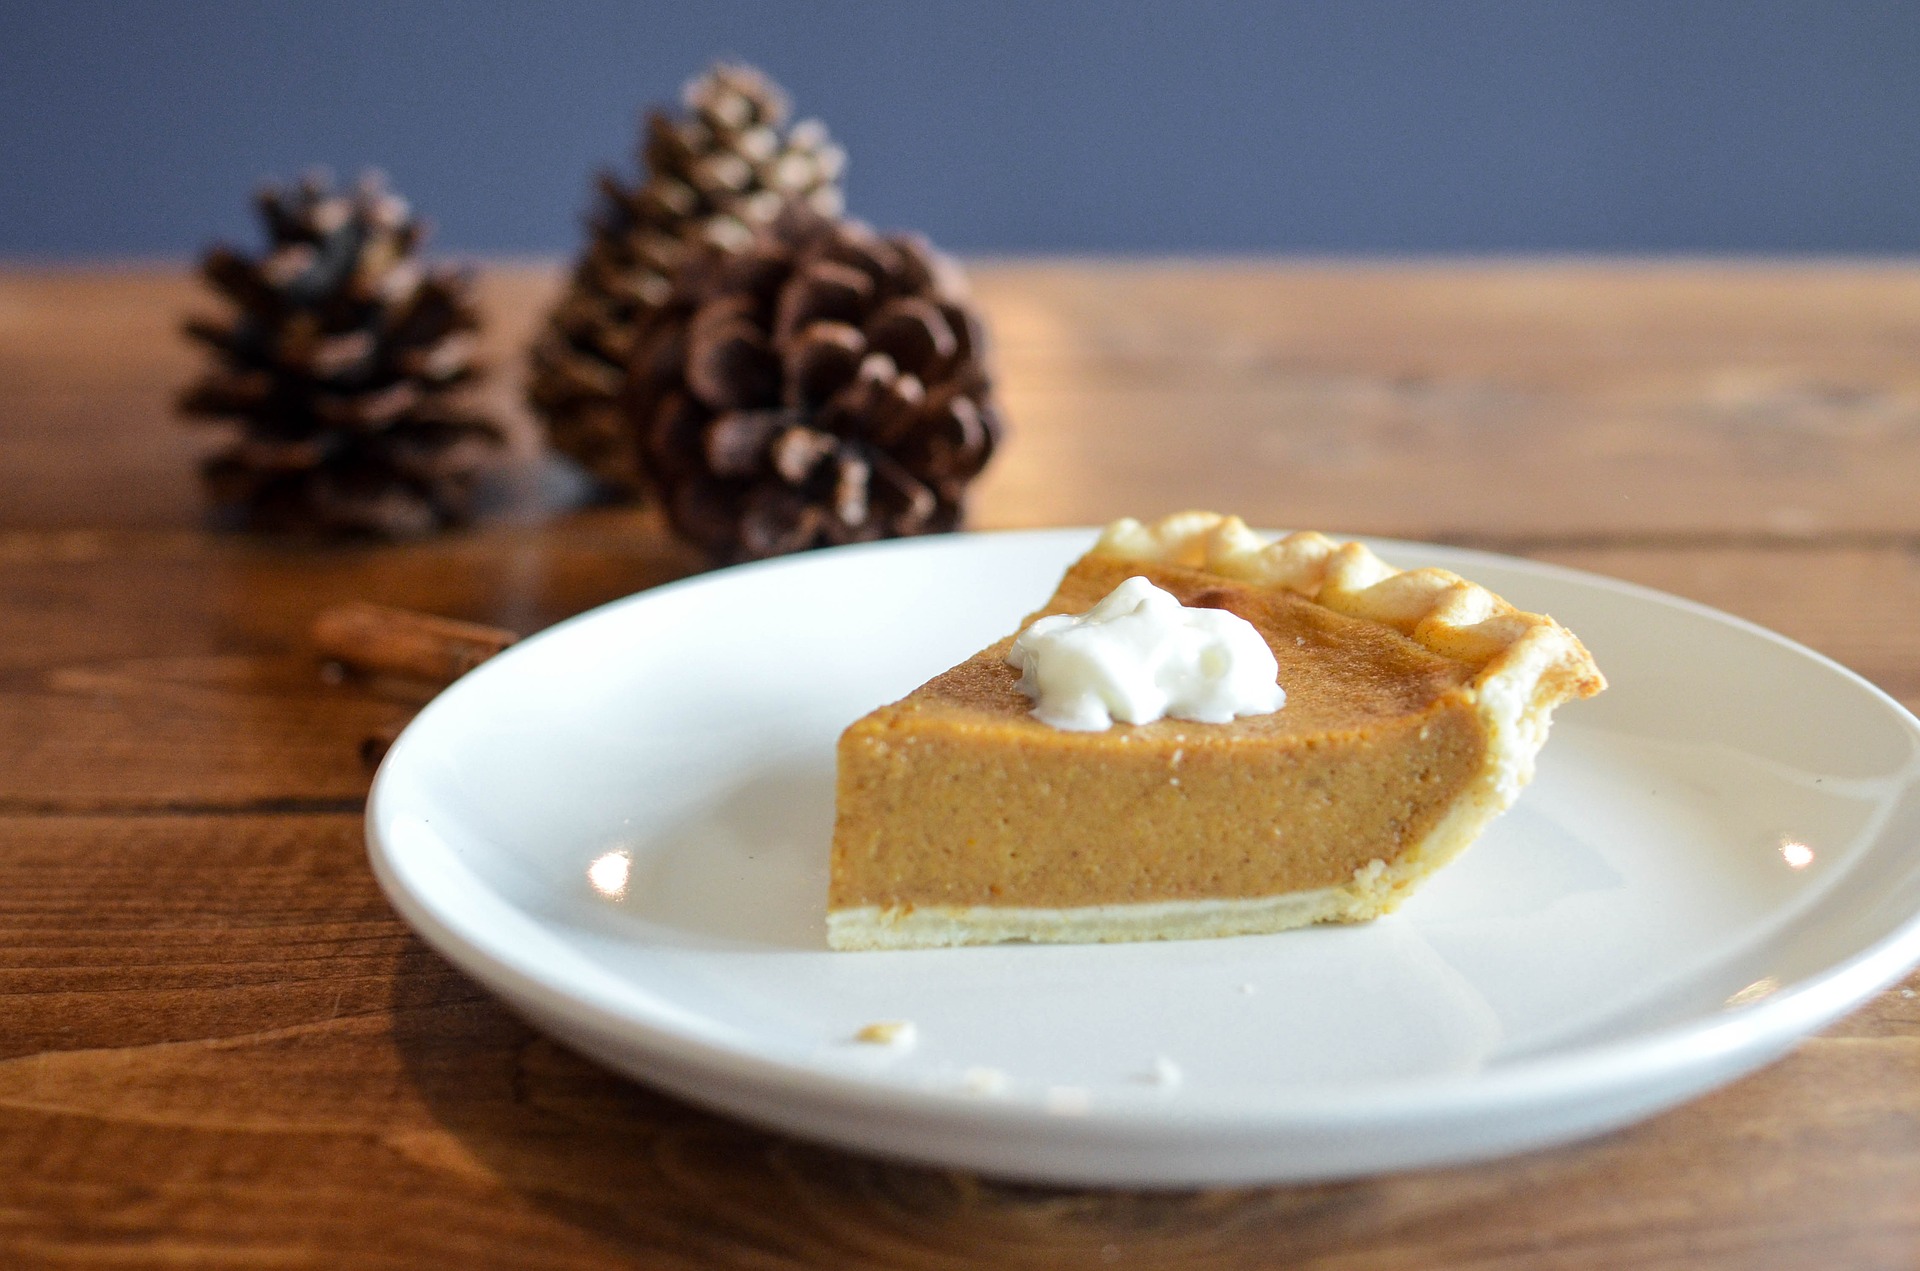 Health blogger Alyssa Deem shares vegan holiday recipes to enjoy with your family and friends.